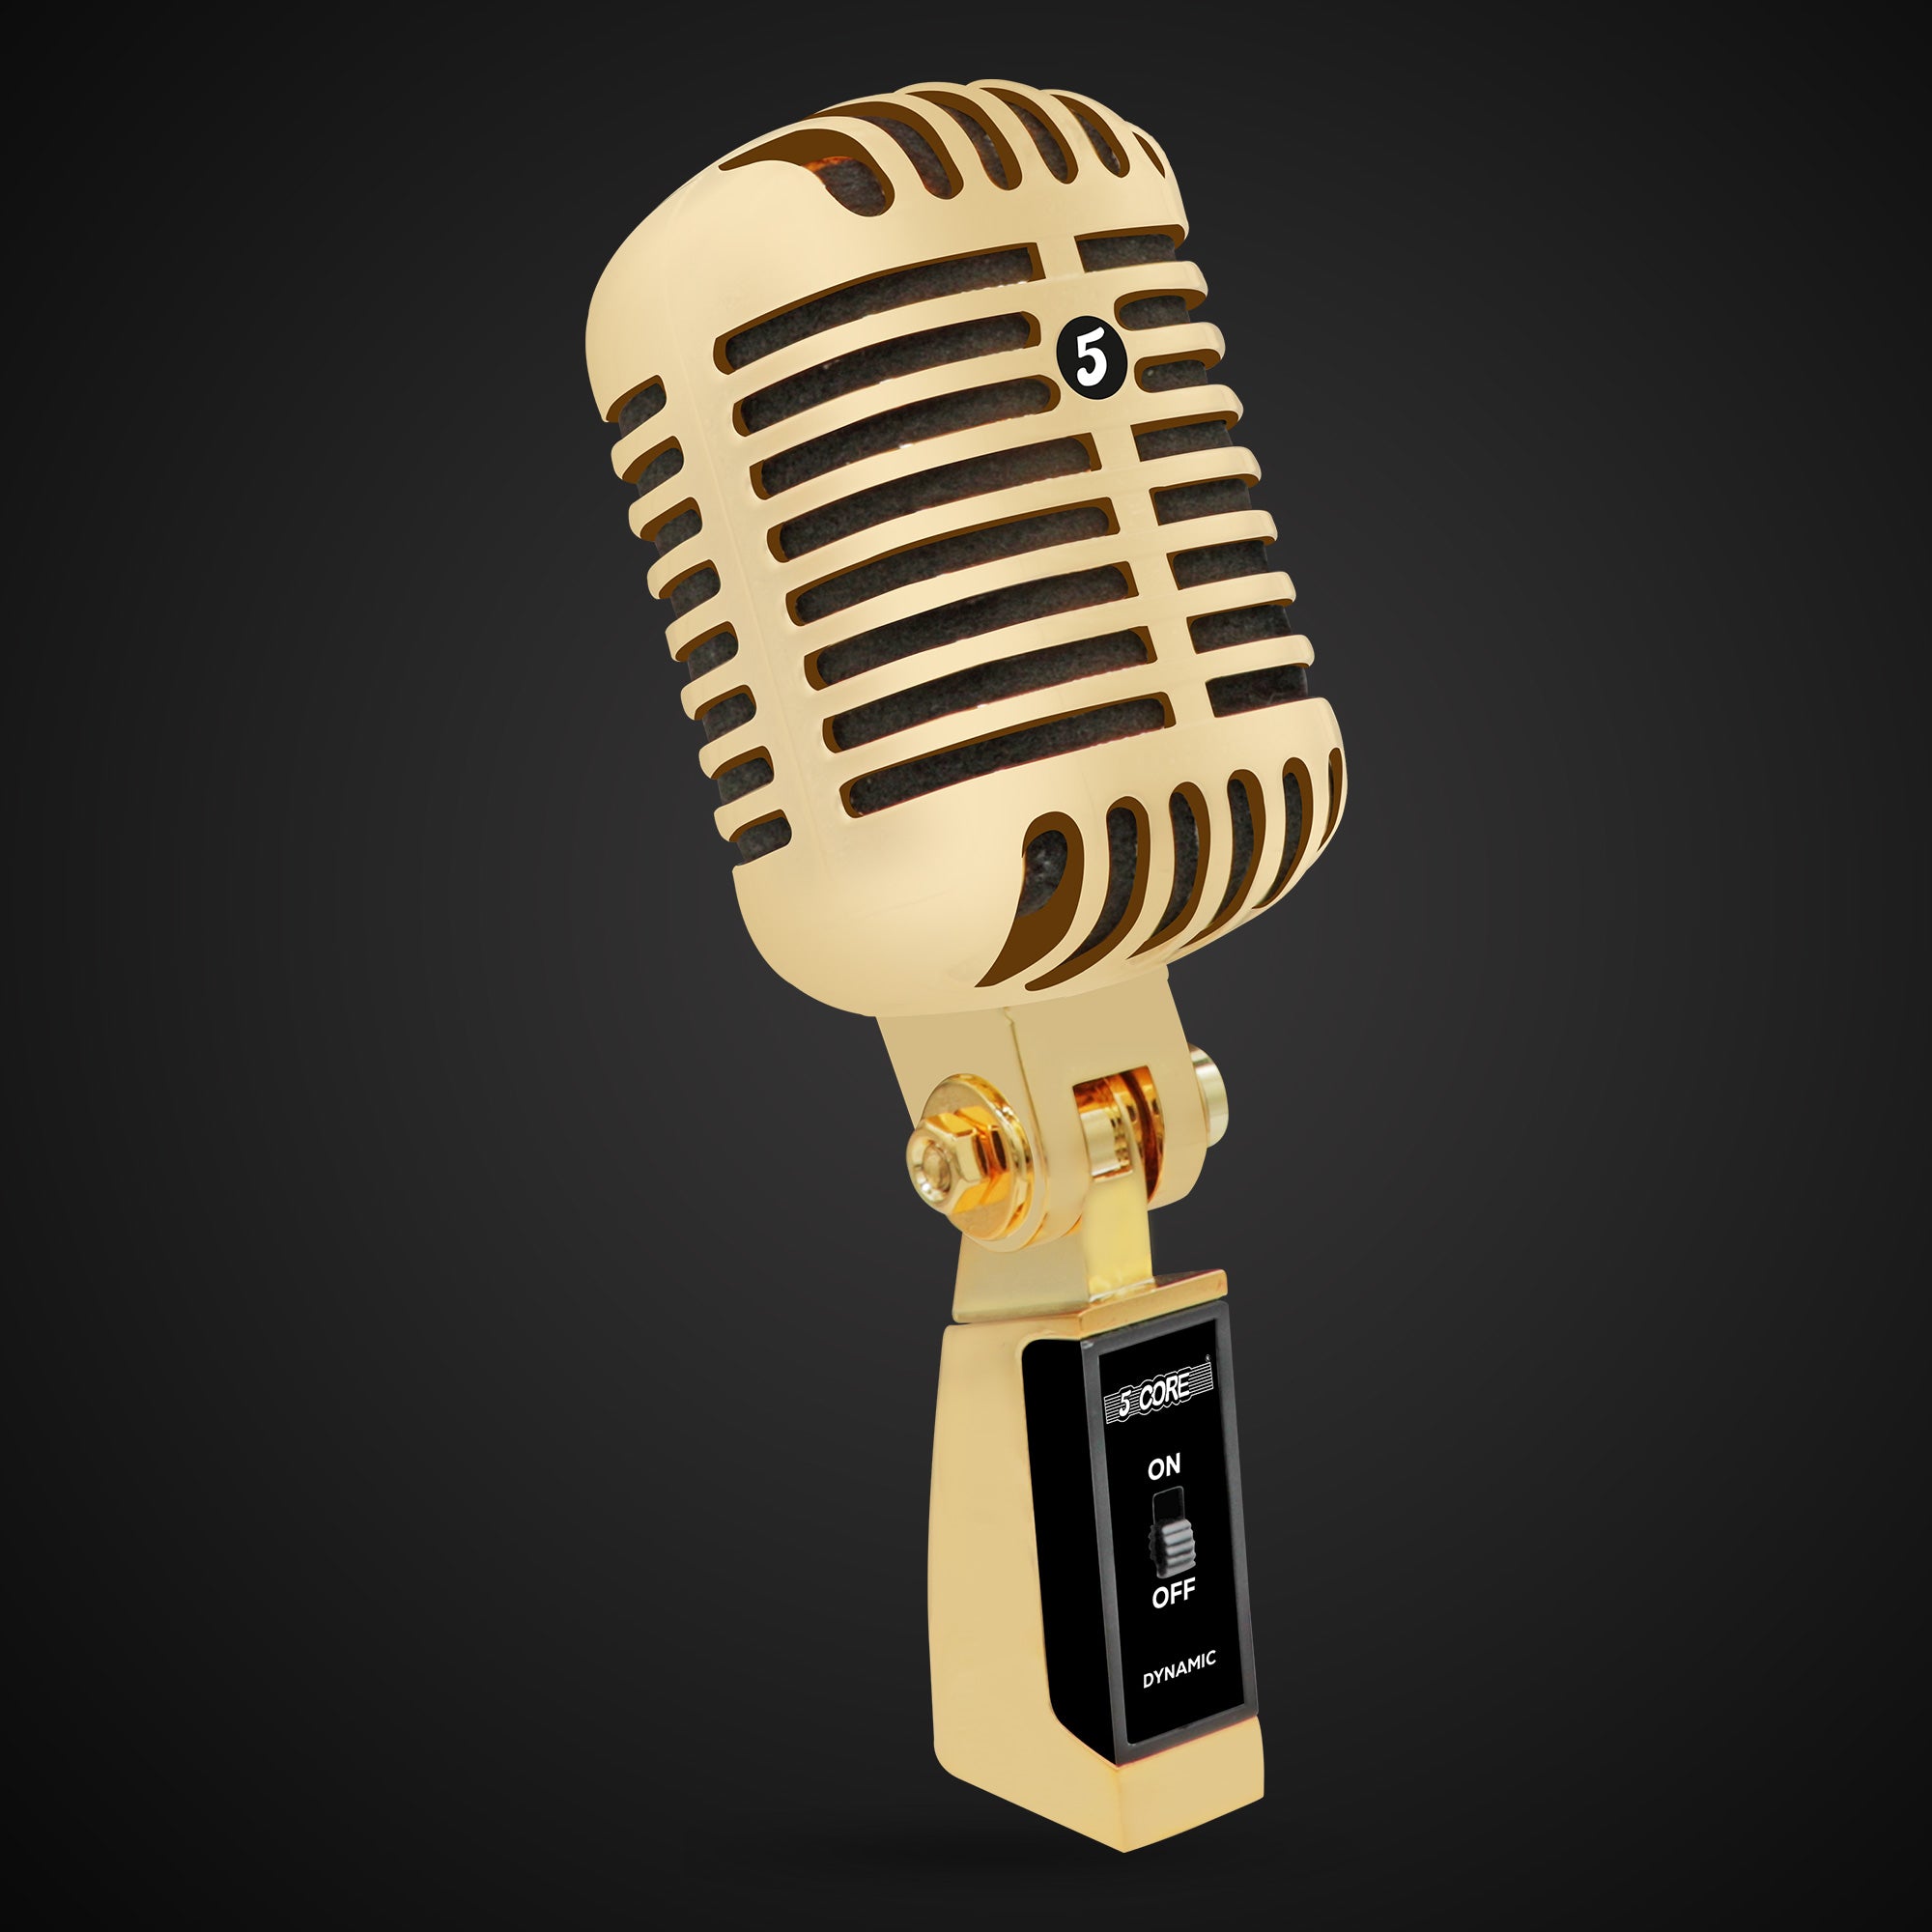 5 Core Classic Retro Microphone Electret Condenser Vocal Rich Iconic Gold Vintage Style Metal Unidirectional Super Cardioid 48V Phantom Mic w Pop Filter for Studio Recording Live Gigs -RTRO MIC GLD